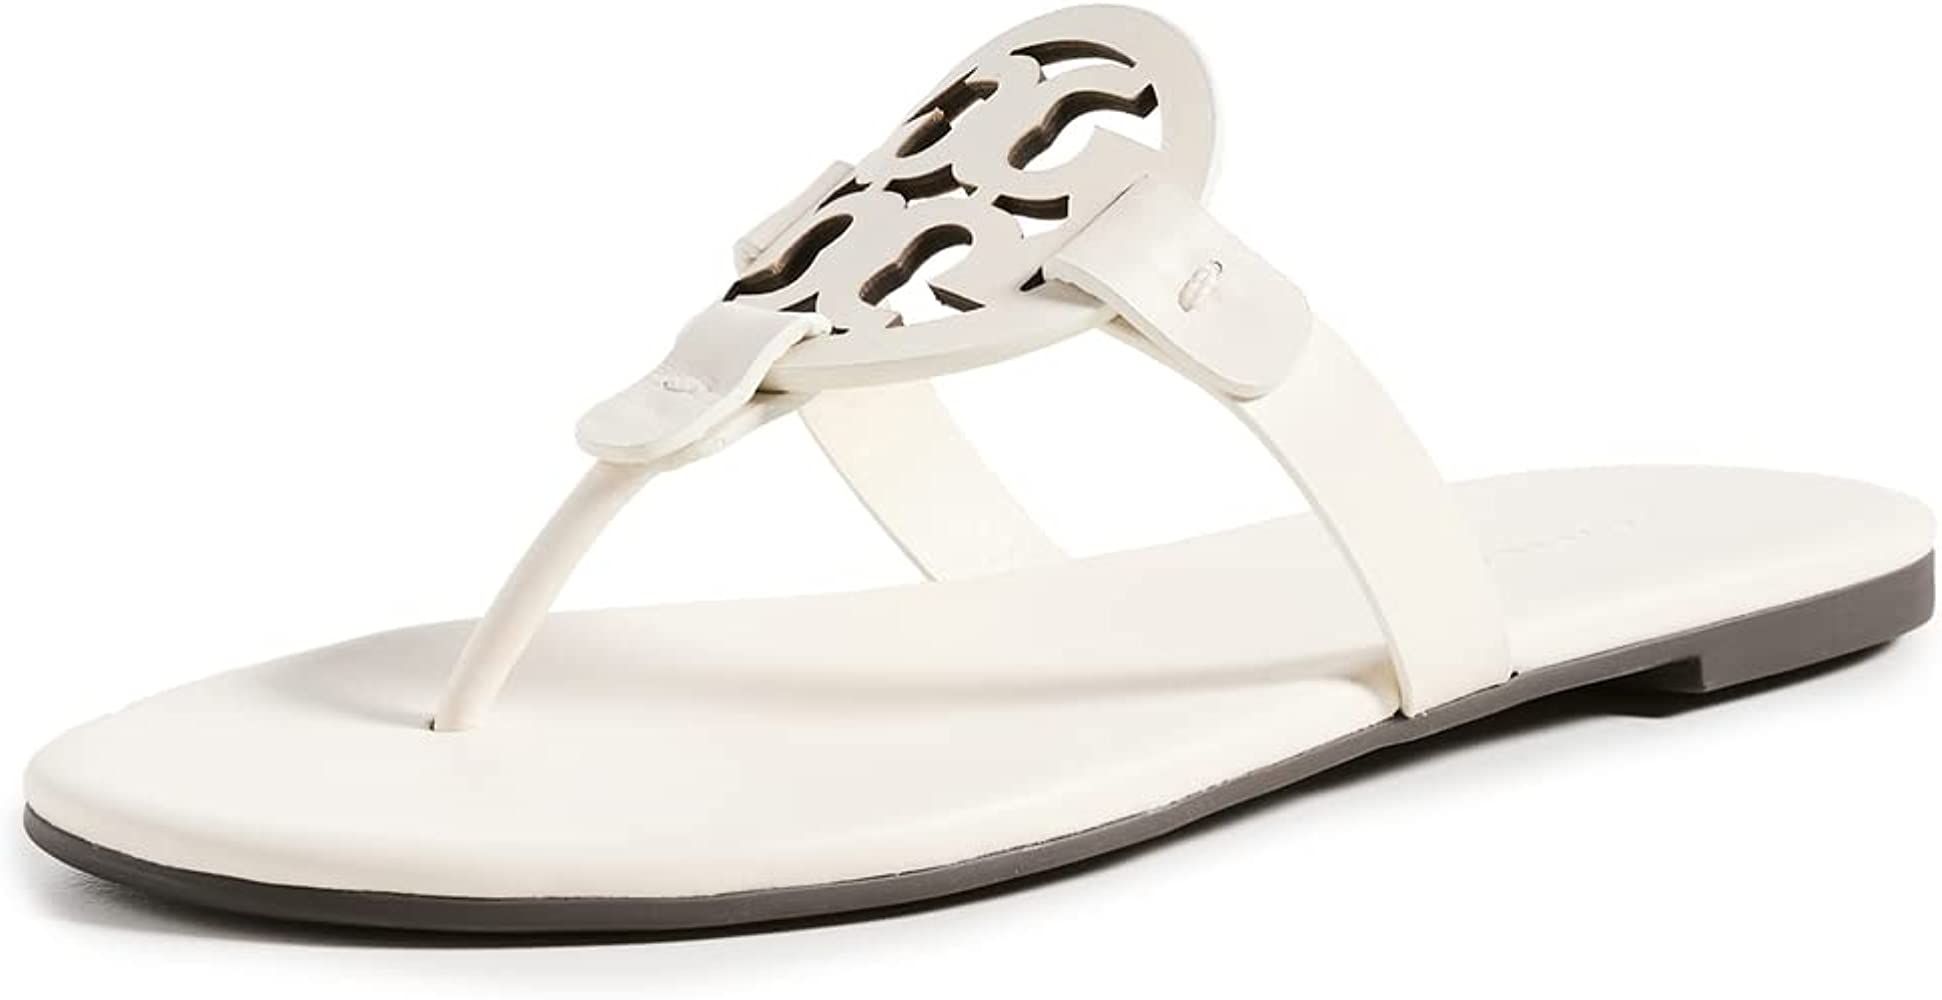 Tory Burch Miller Sandals, White Sandals, White Summer Sandals, Amazon Finds, Amazon Sandals | Amazon (US)